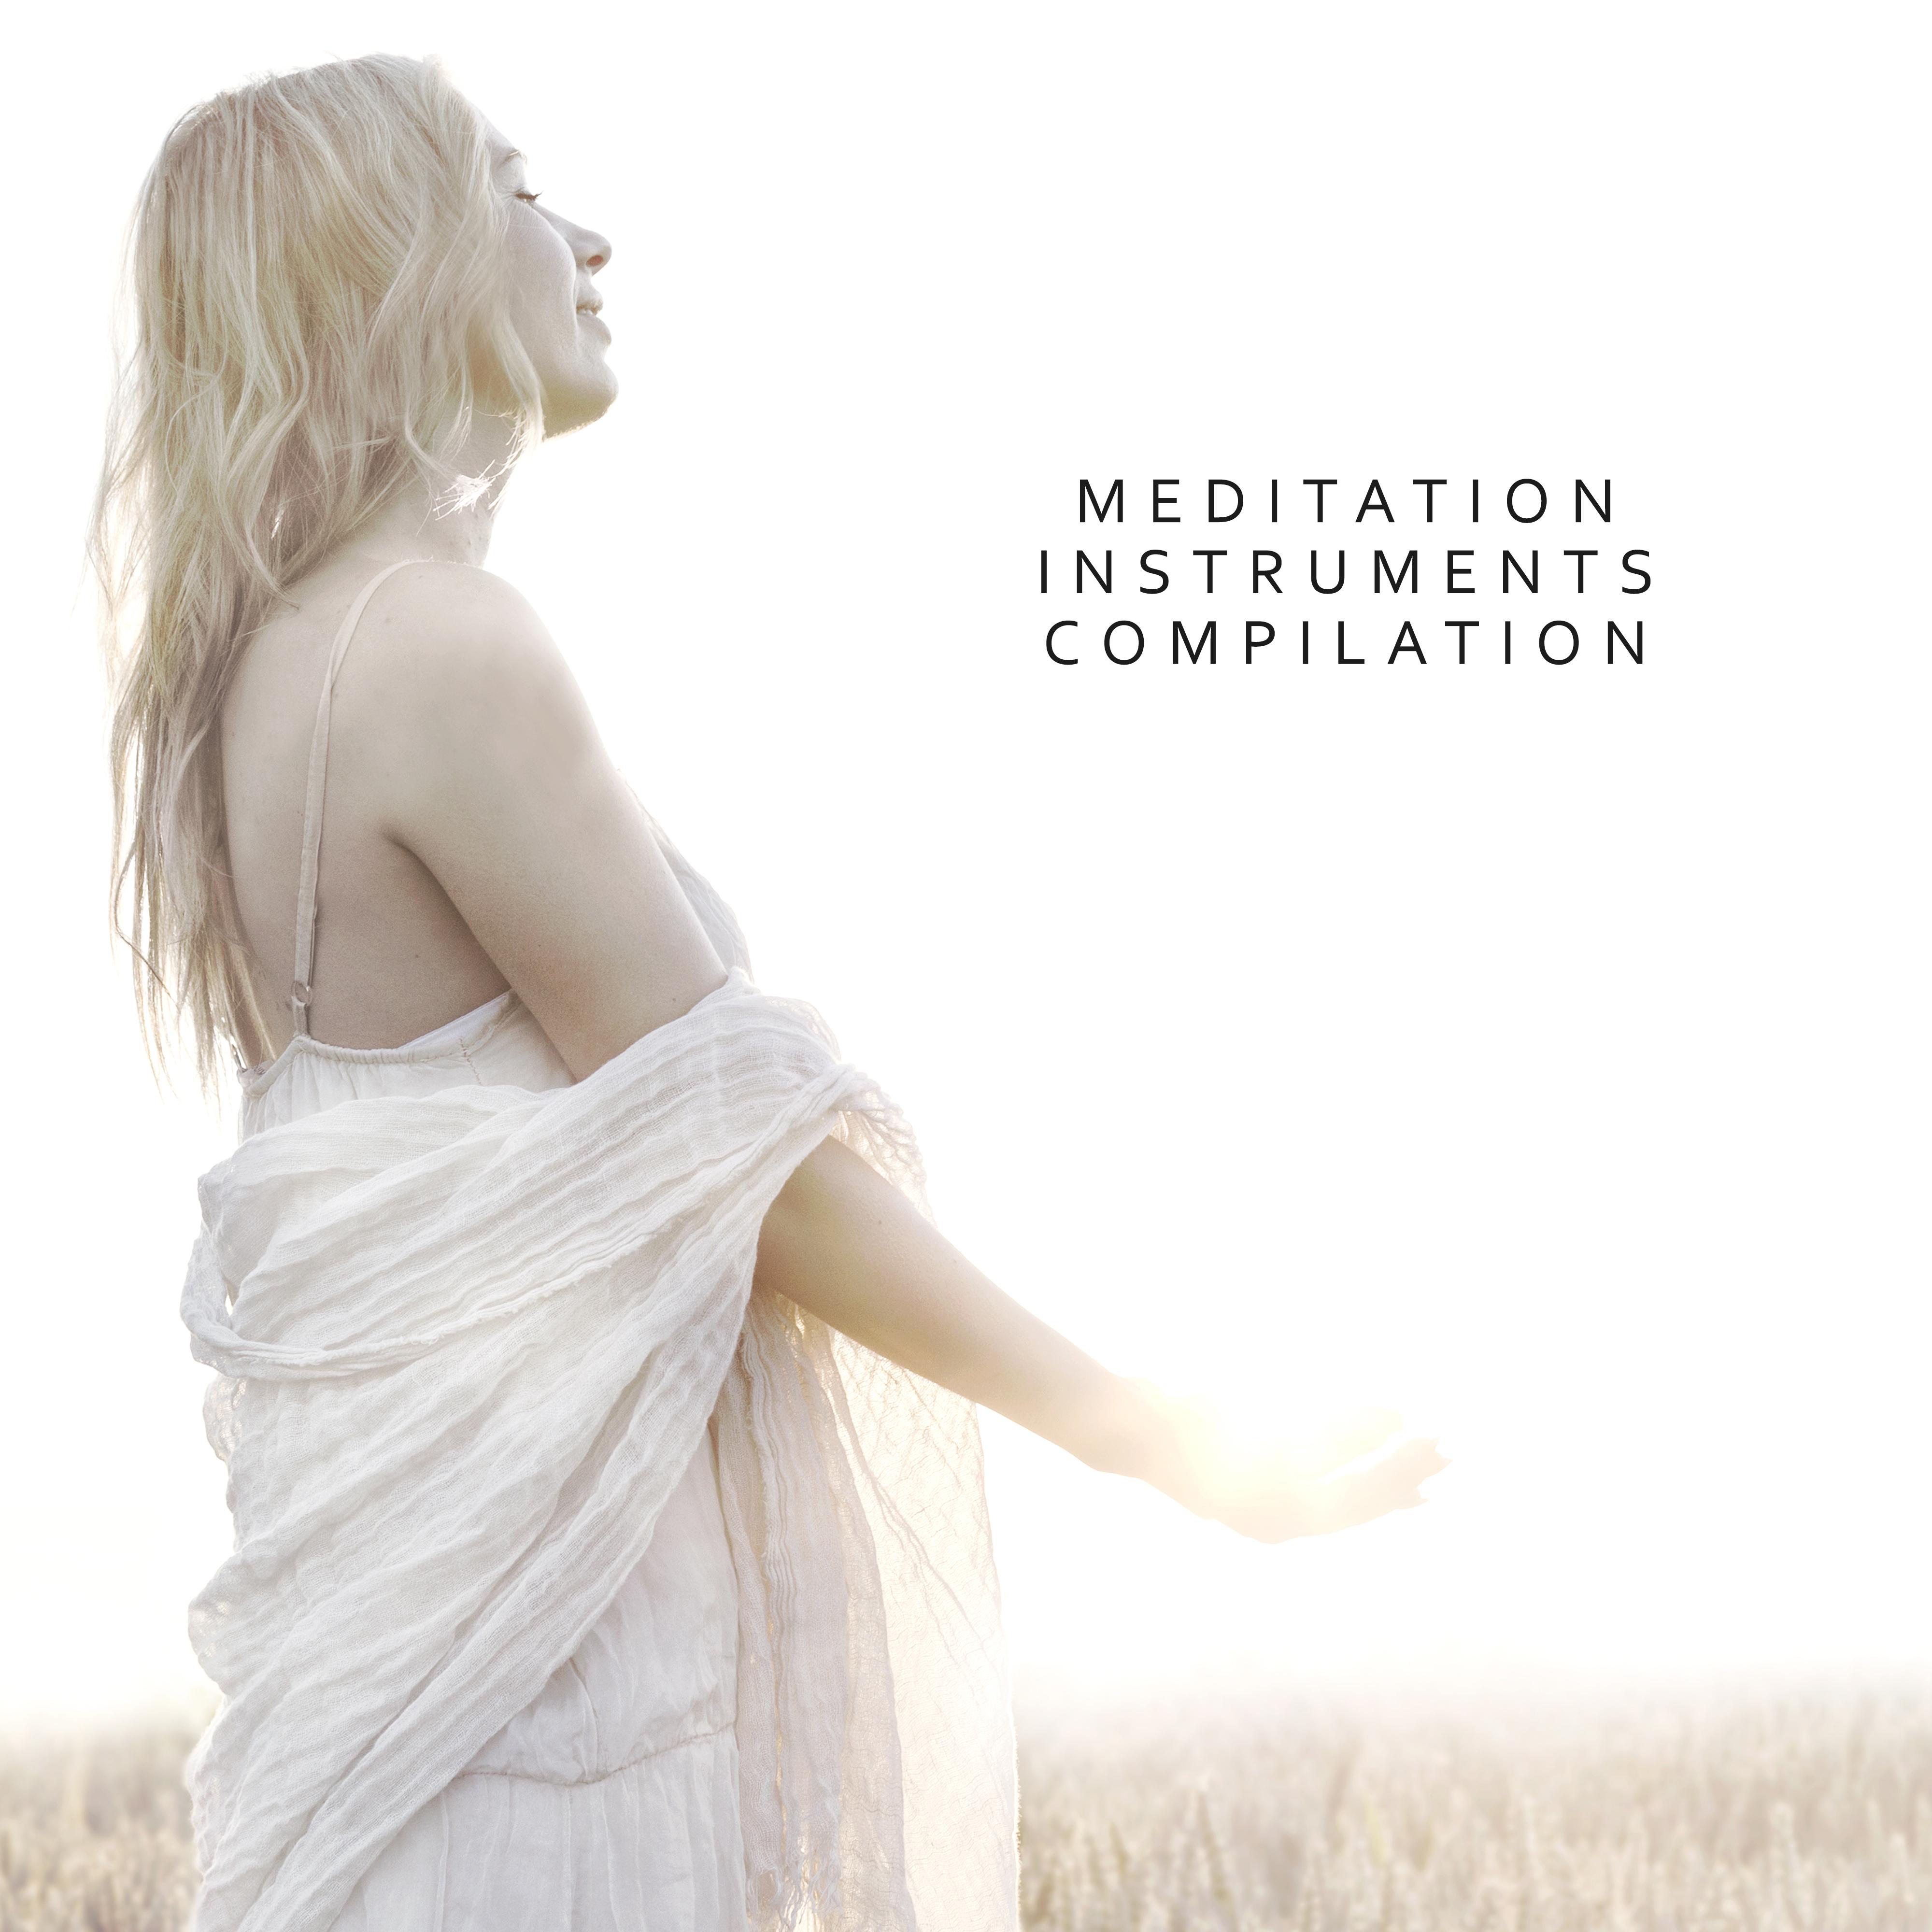 Meditation Instruments Compilation: 15 New Age Songs for Yoga & Relaxation with Harp, Flute, Pads & Other Instruments Sounds